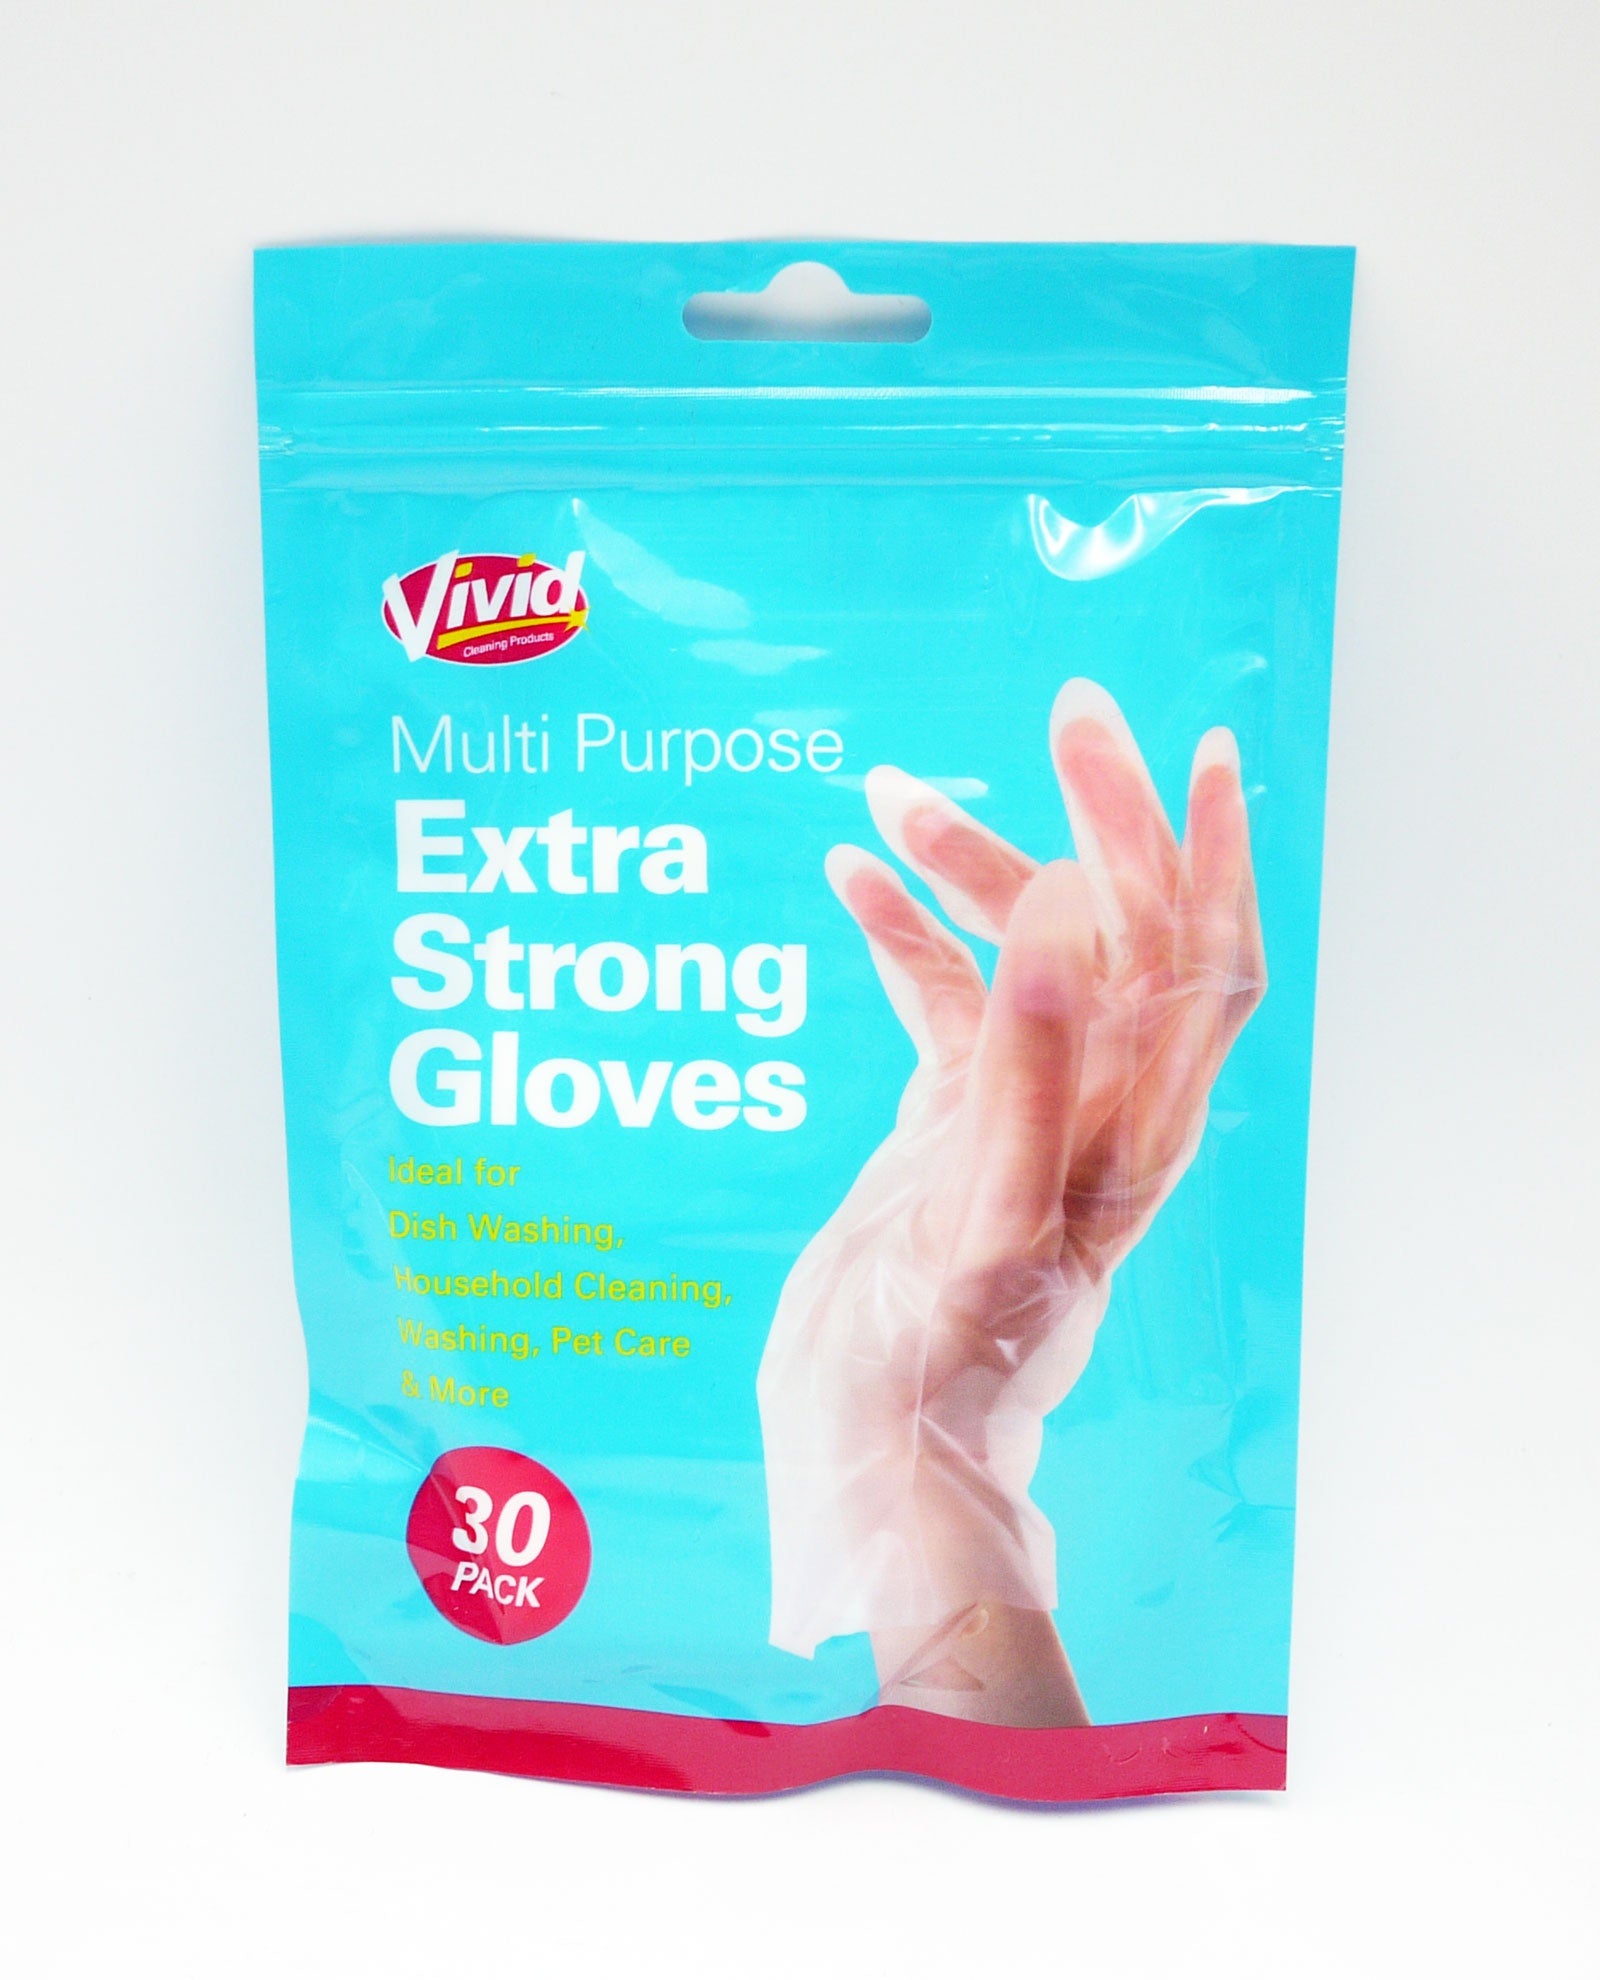 Multipurpose Extra Strong Gloves*